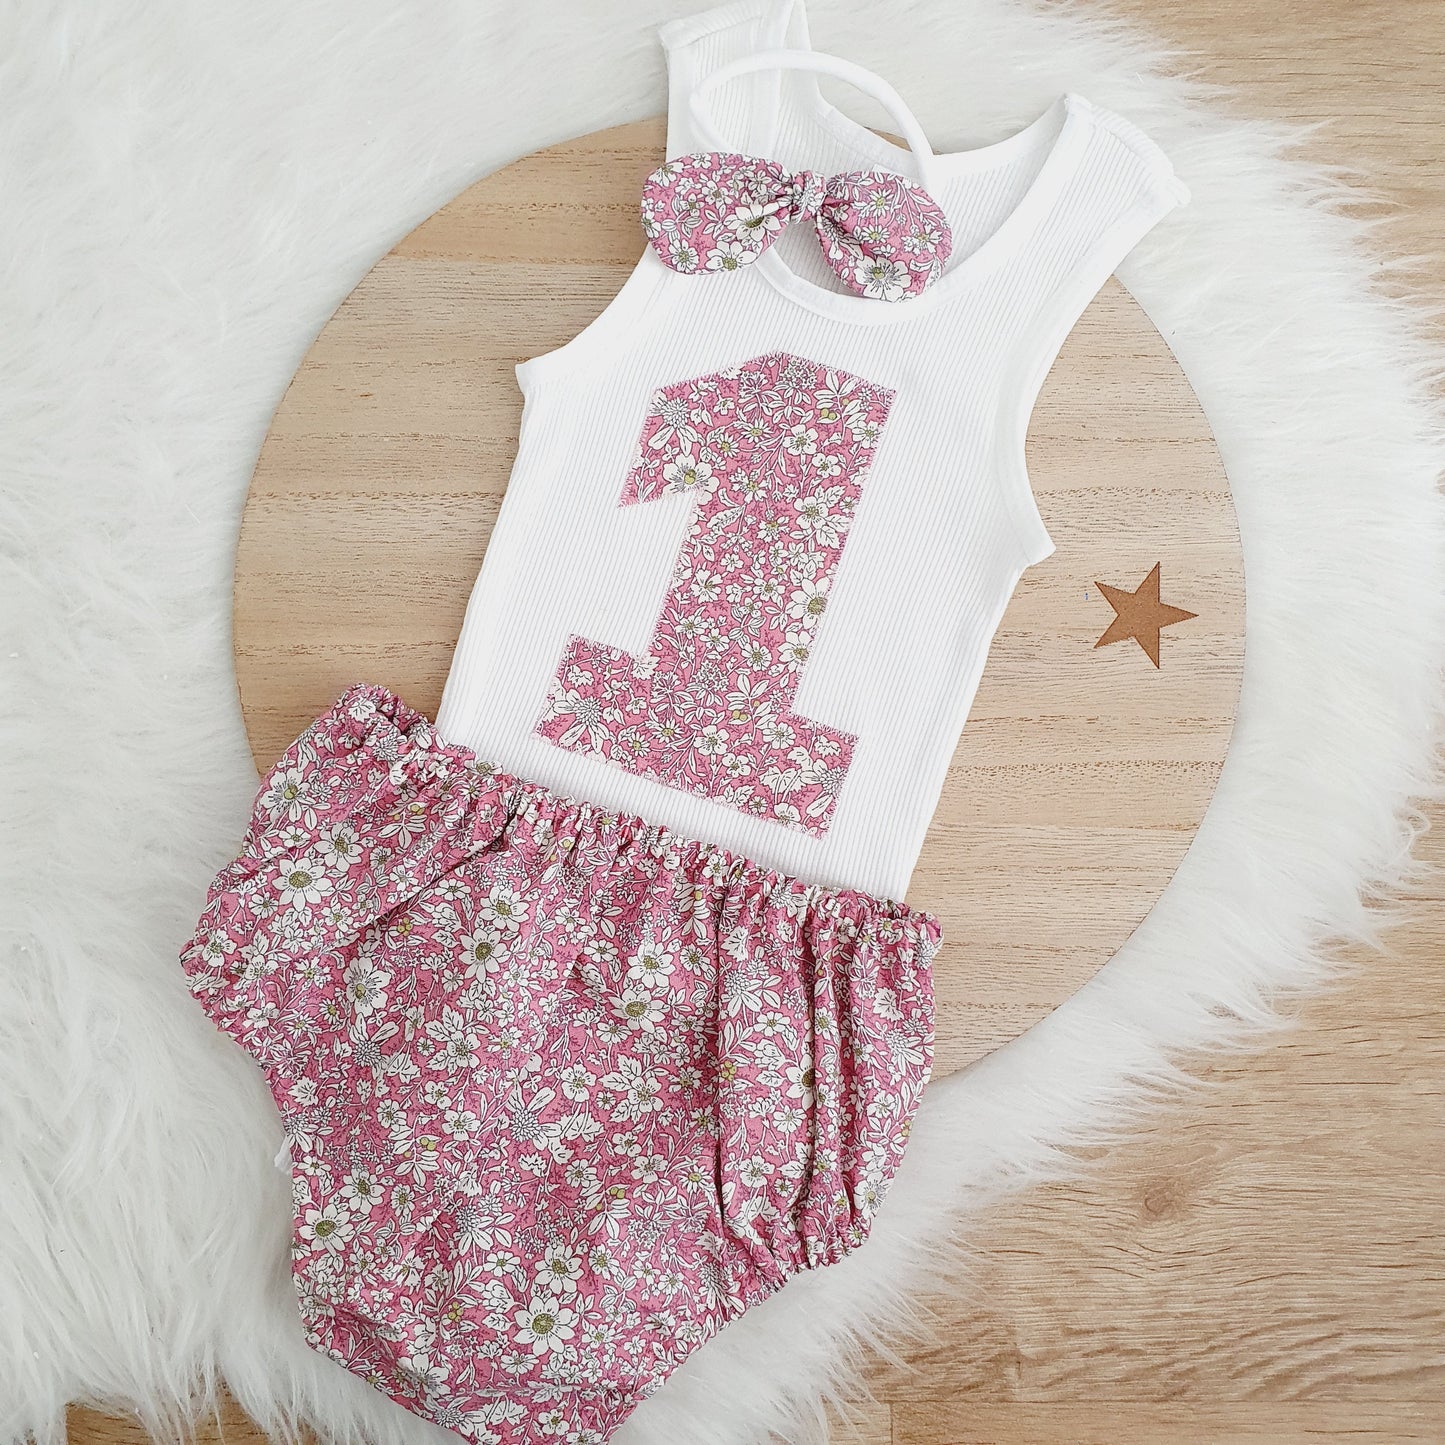 Girls 1st Birthday - Cake Smash Outfit, Size 1, Nappy Cover, Headband & Singlet Set, VINTAGE FLORAL